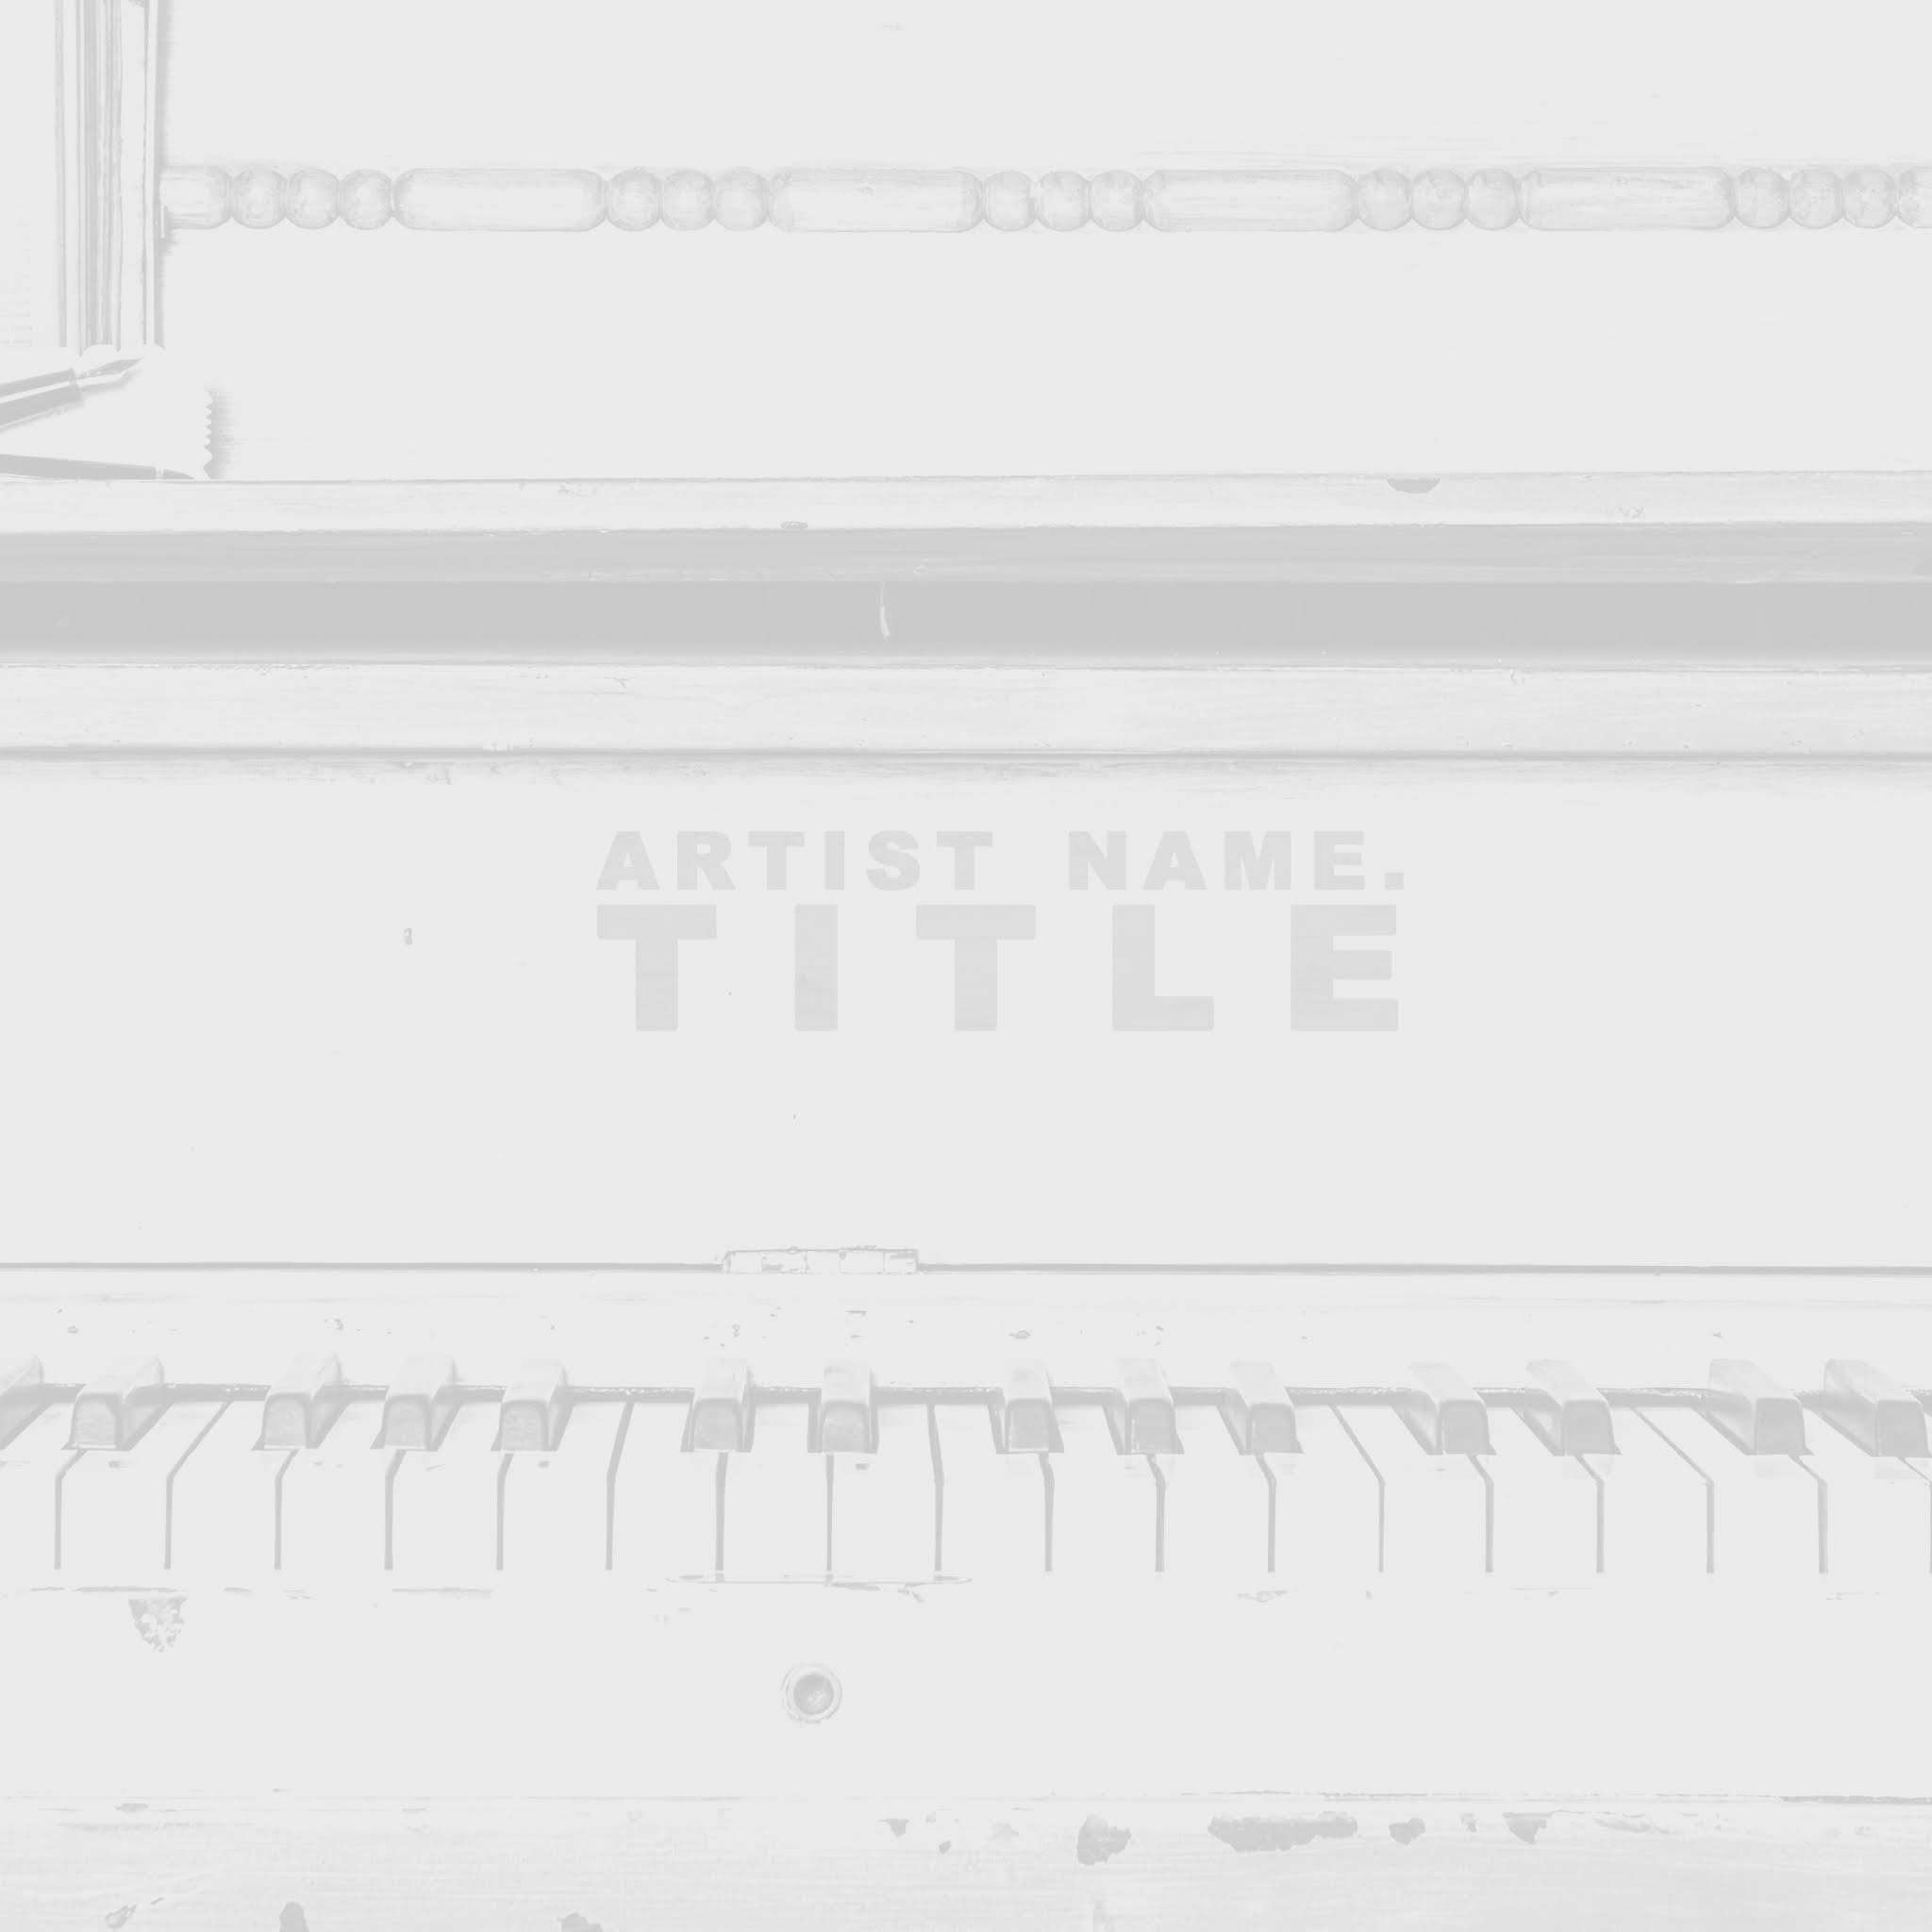 This simple plain white album cover speaks volumes. Stunning white with layered sheet music and transparent look and feel. Captivating image design with pencil drawing style art. Designed exclusively for the classically-trained musician/artist/band - Perfect for piano music, instrumental music albums, orchestral music, jazz and anything that sounds upscale